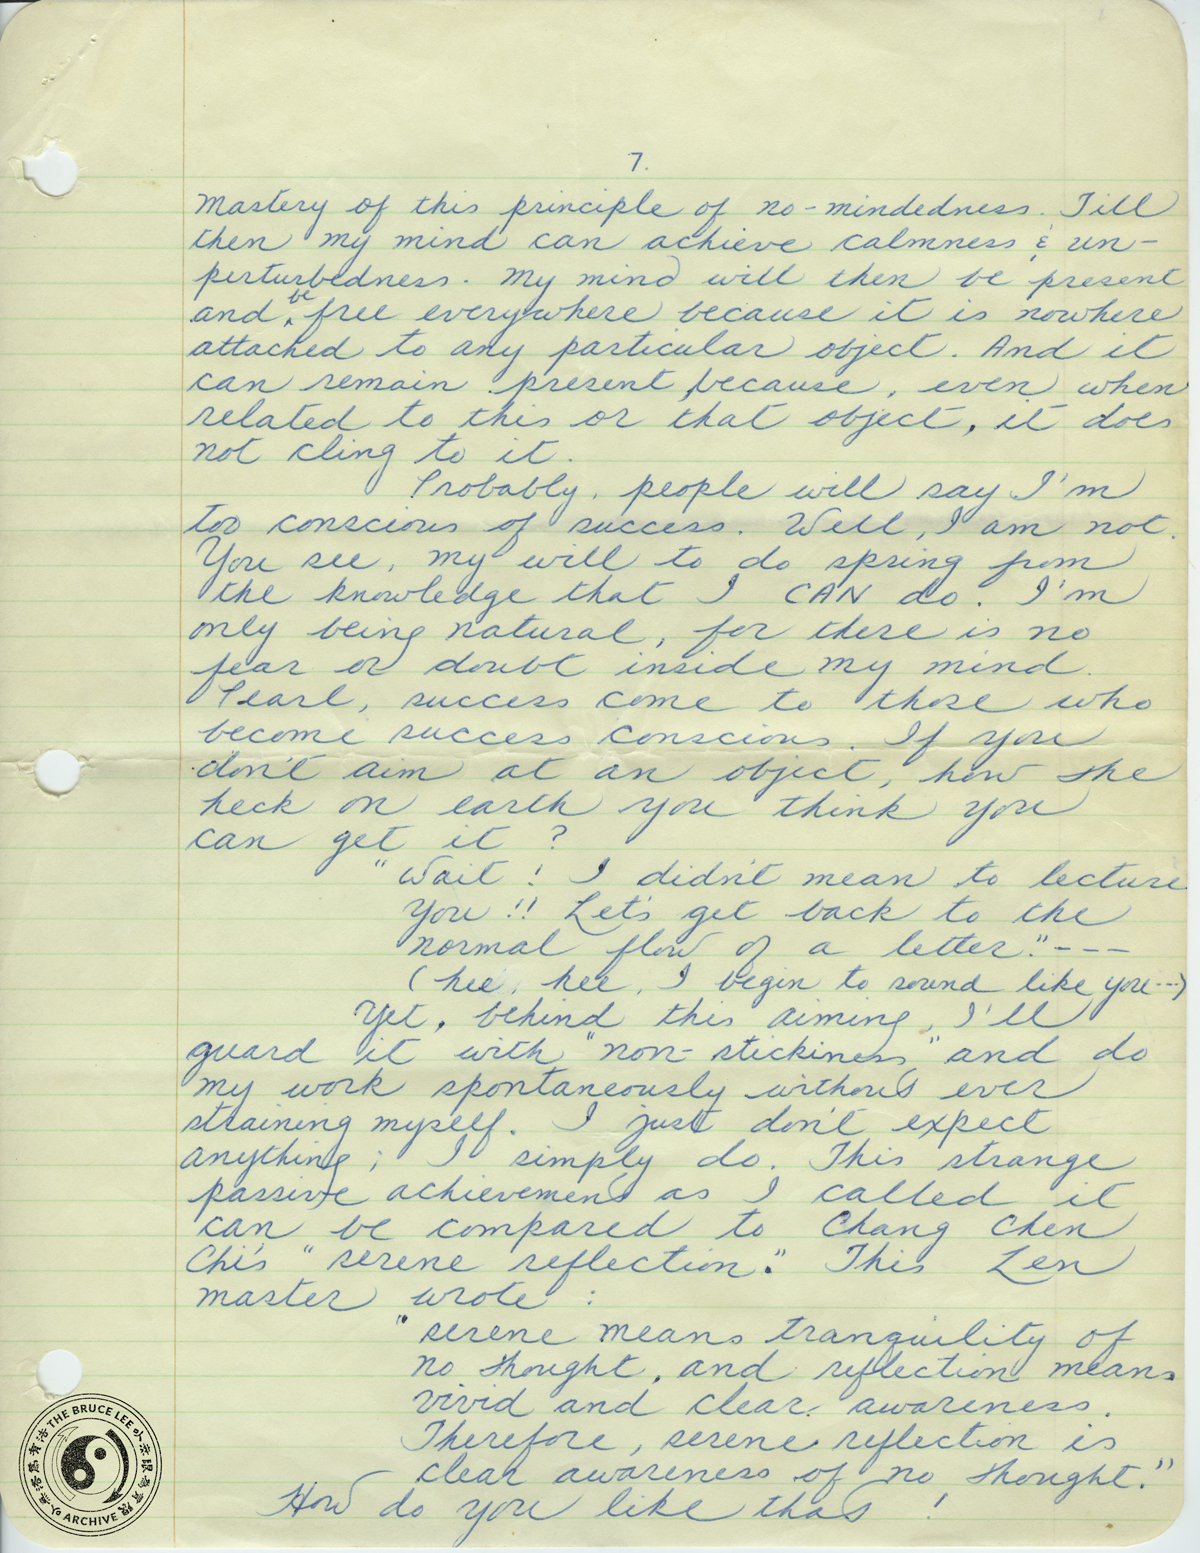 Letter-to-Pearl-draft-pg.7-archive.jpg